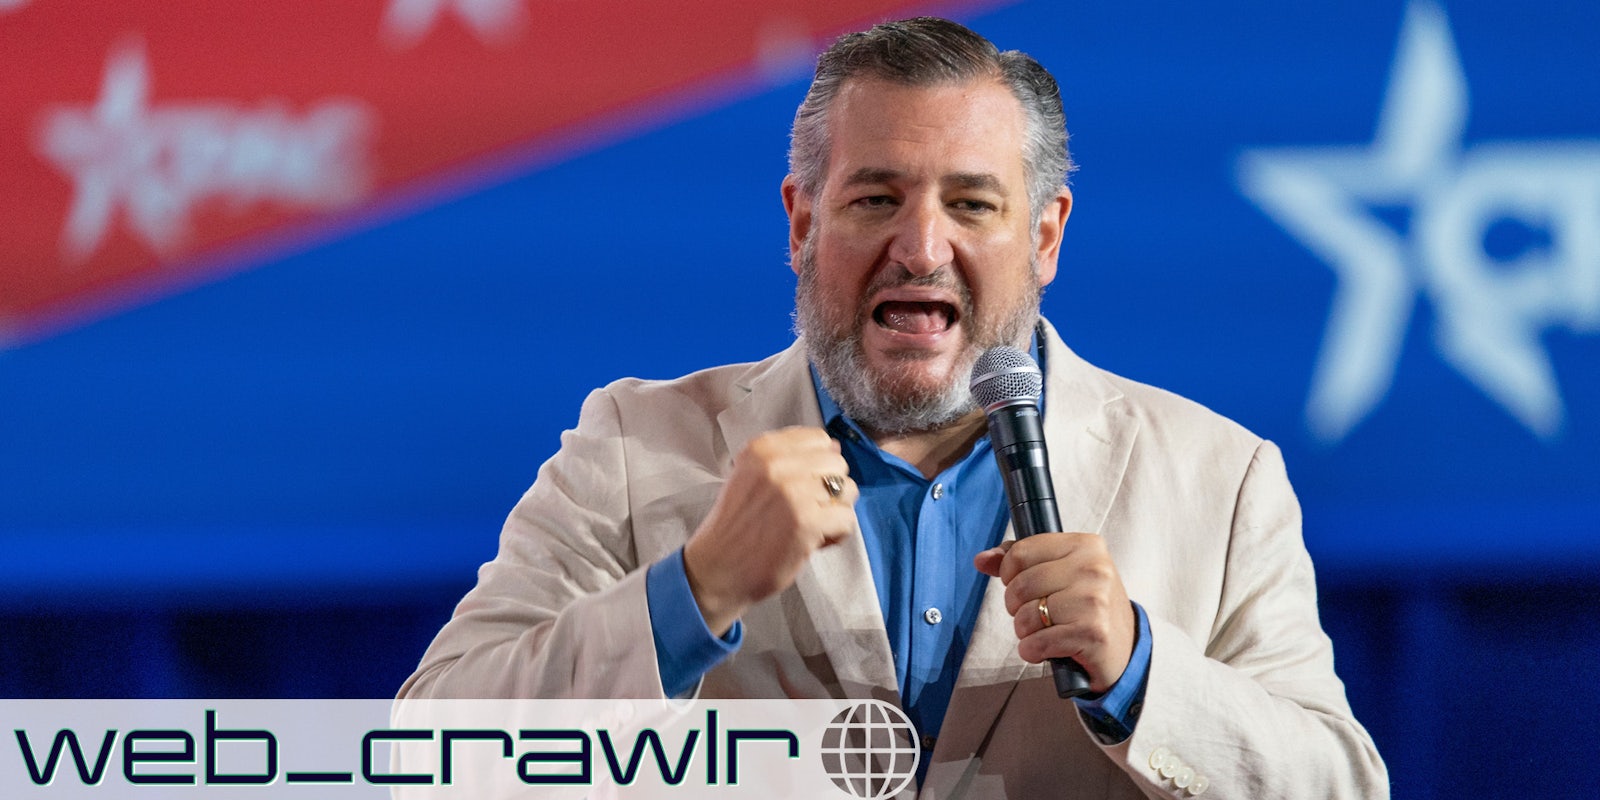 Sen. Ted Cruz yelling into a microphone. The Daily Dot newsletter web_crawlr logo is in the bottom left corner.